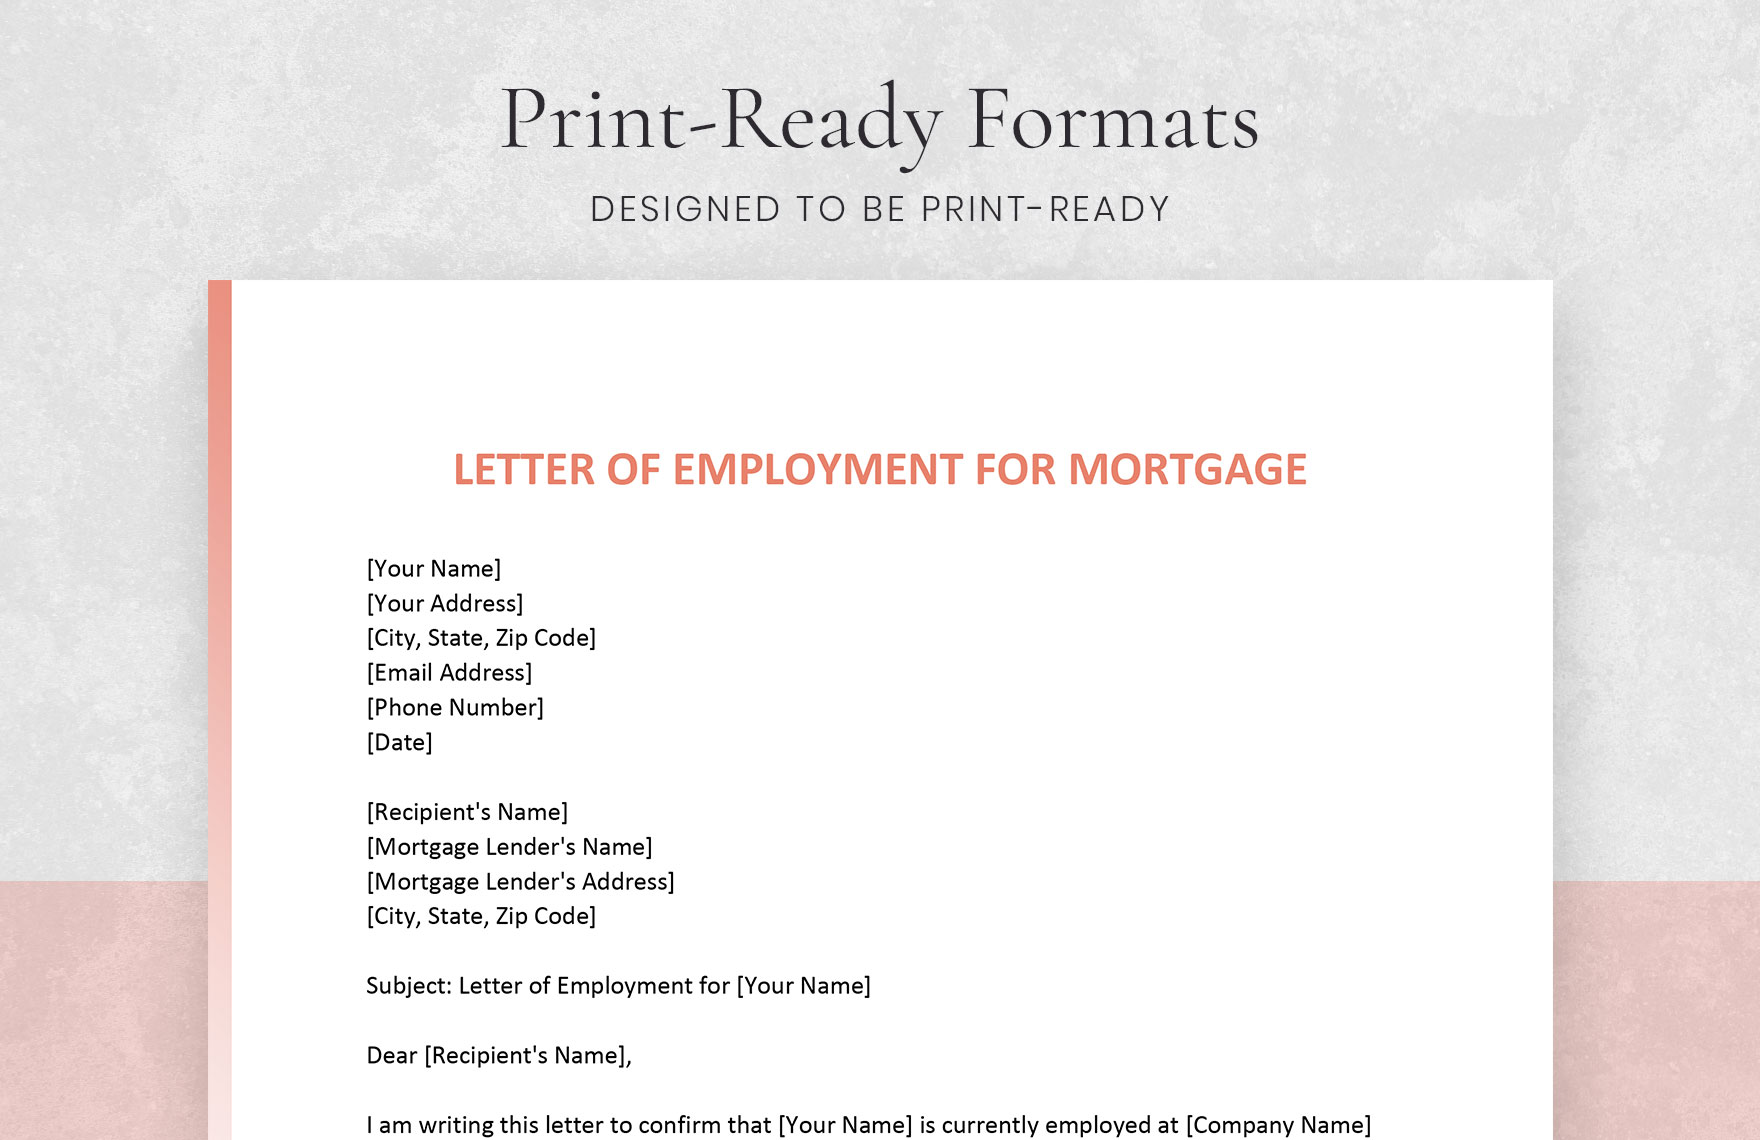 Letter of Employment for Mortgage